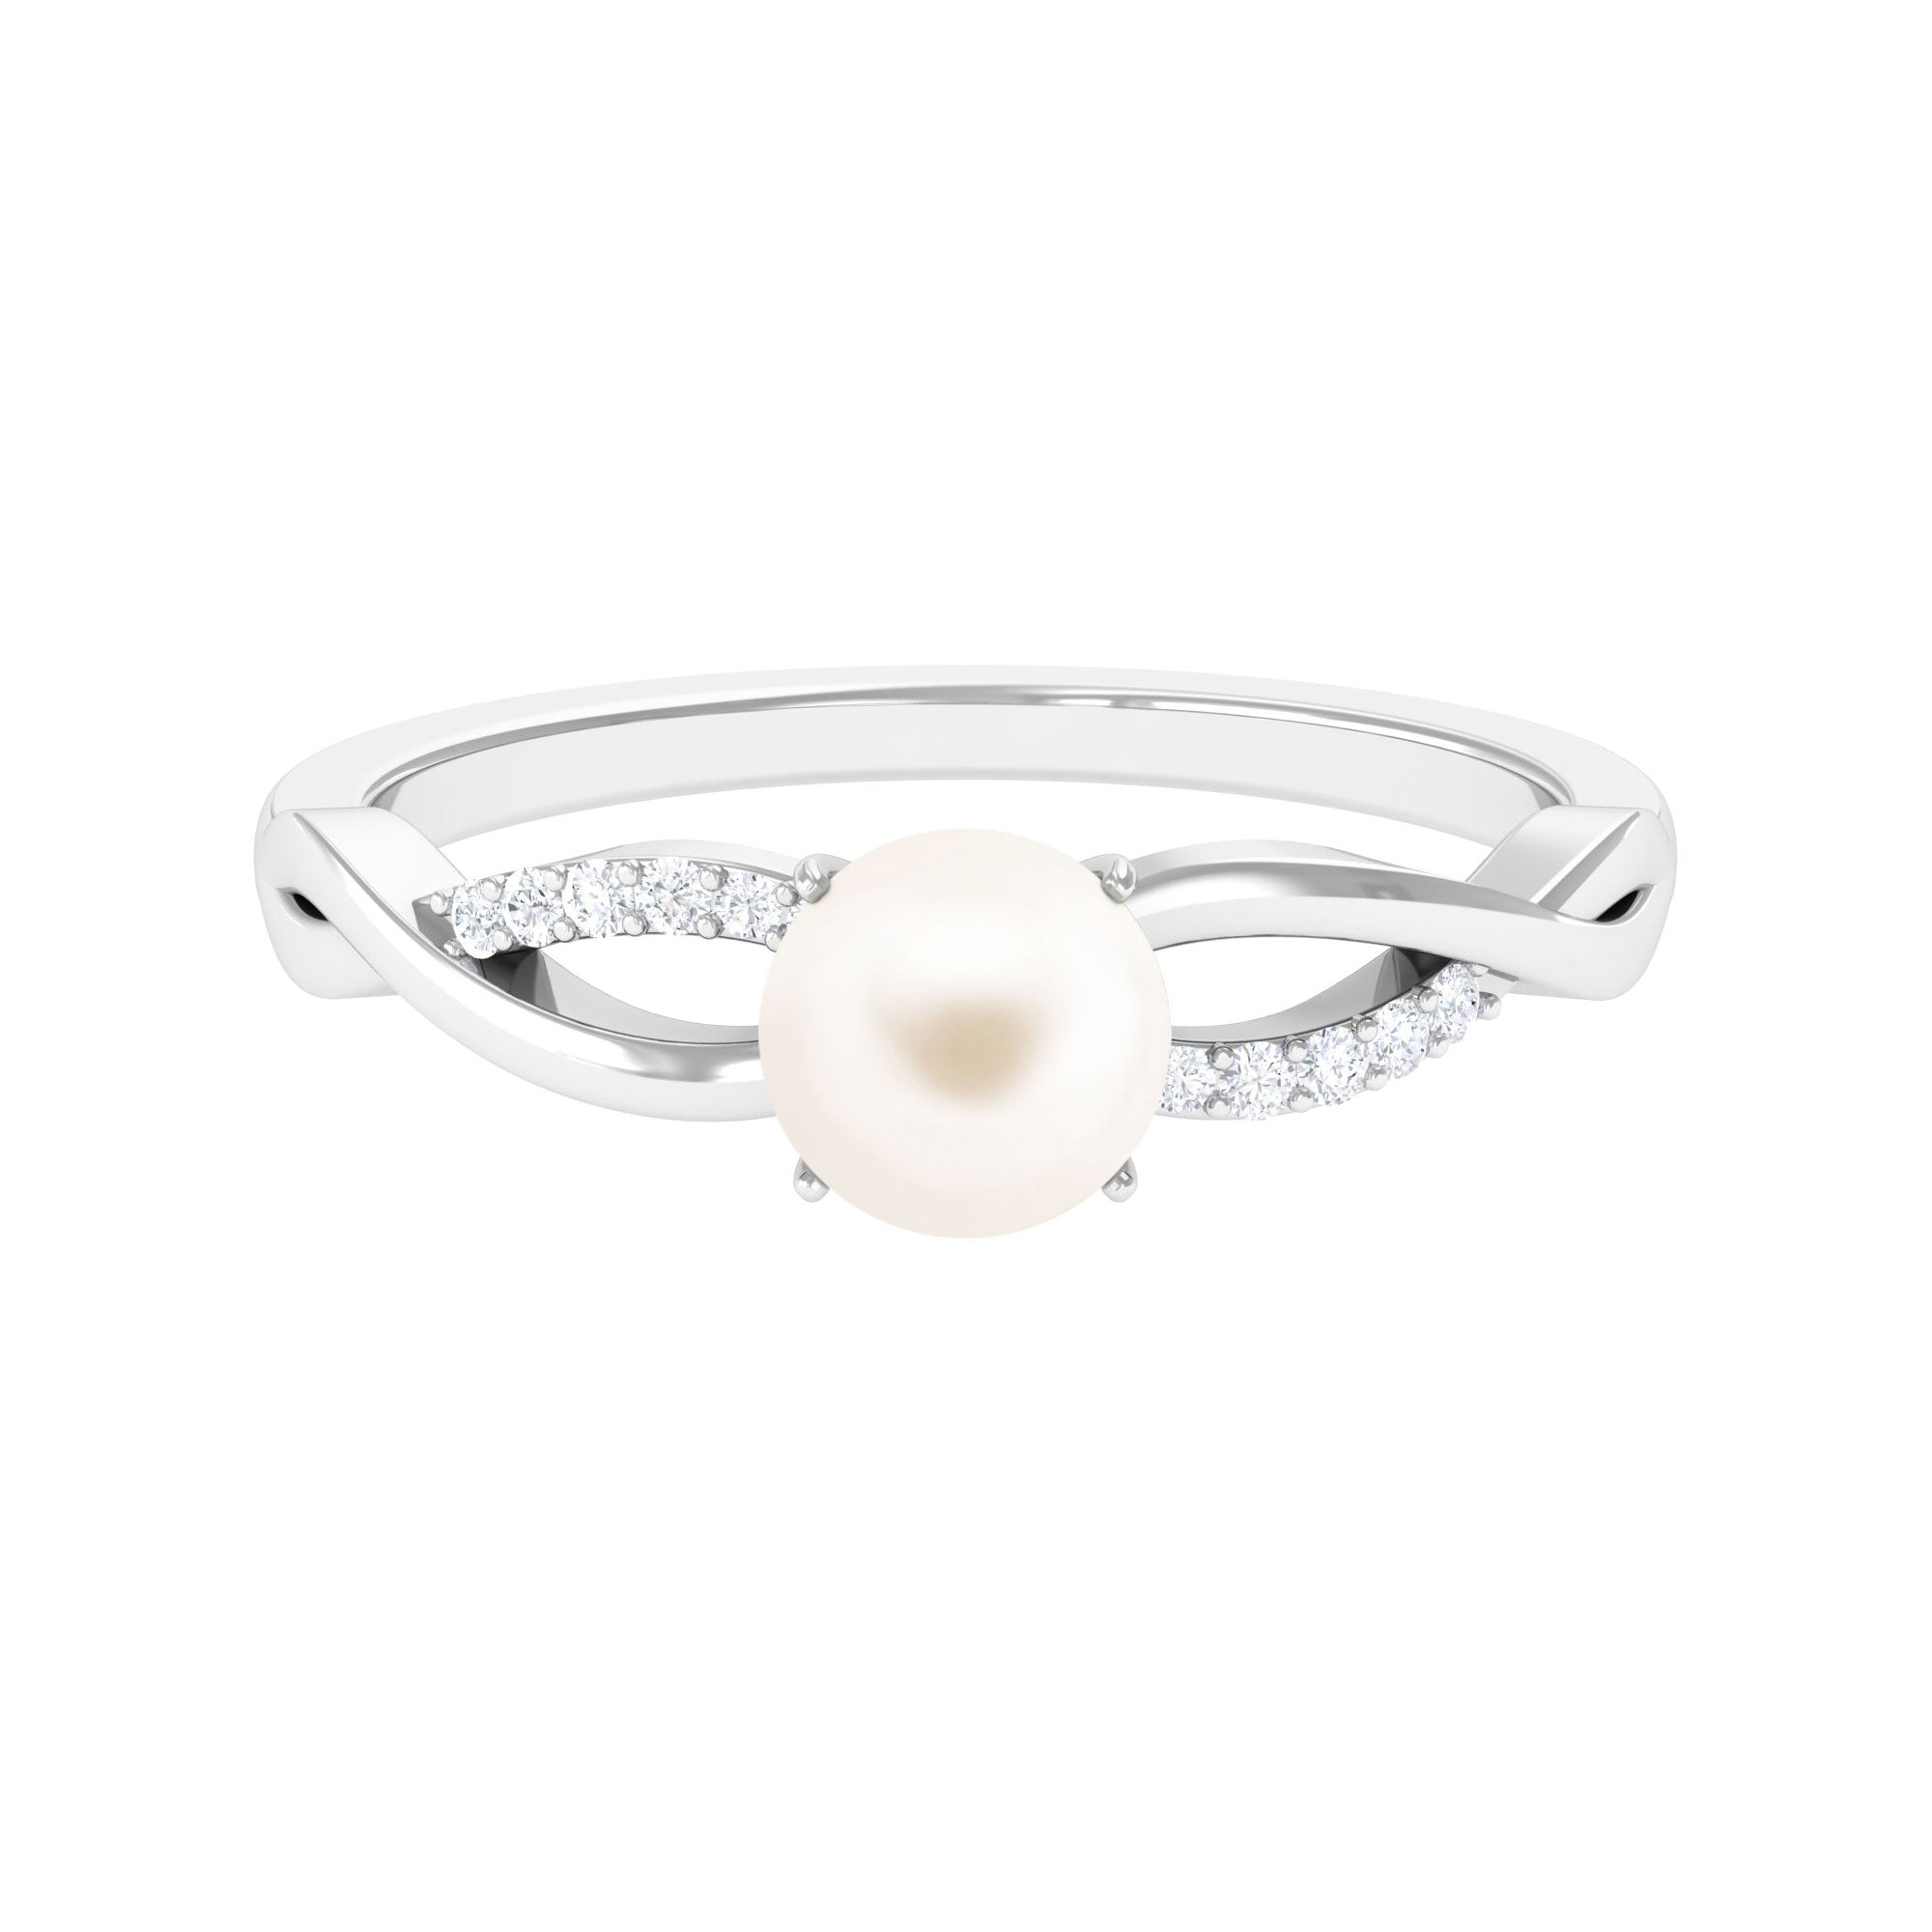 Arisha Jewels-Cultured White Pearl Solitaire Braided Ring with Diamond